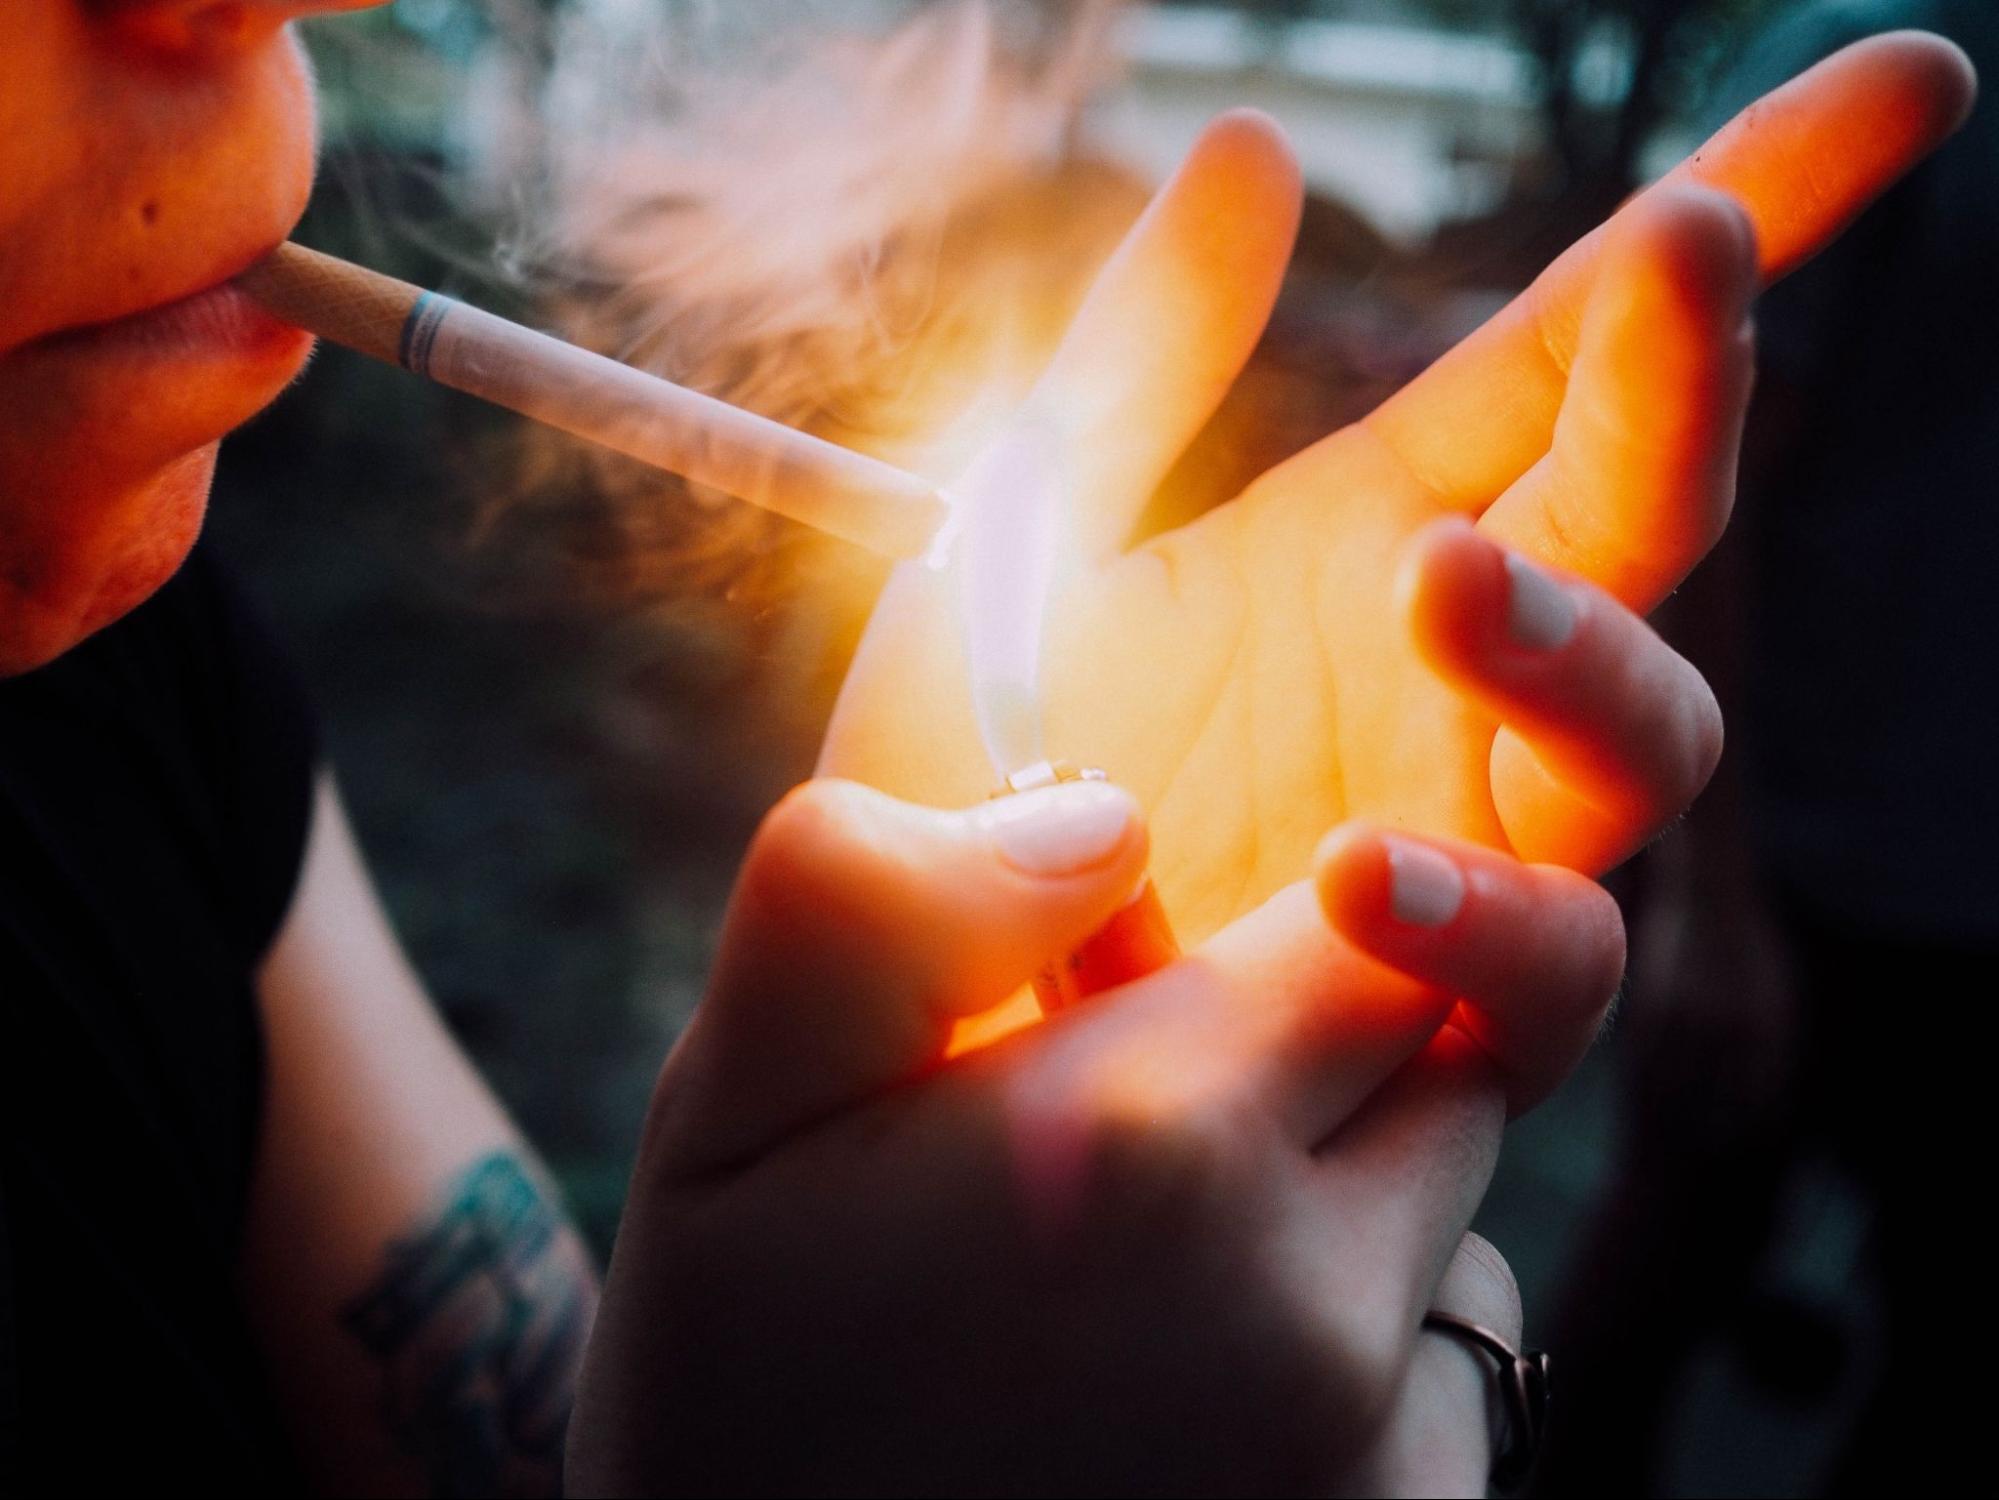 Person lighting a cigarette. The cigarette and the flame are the focus of the picture.